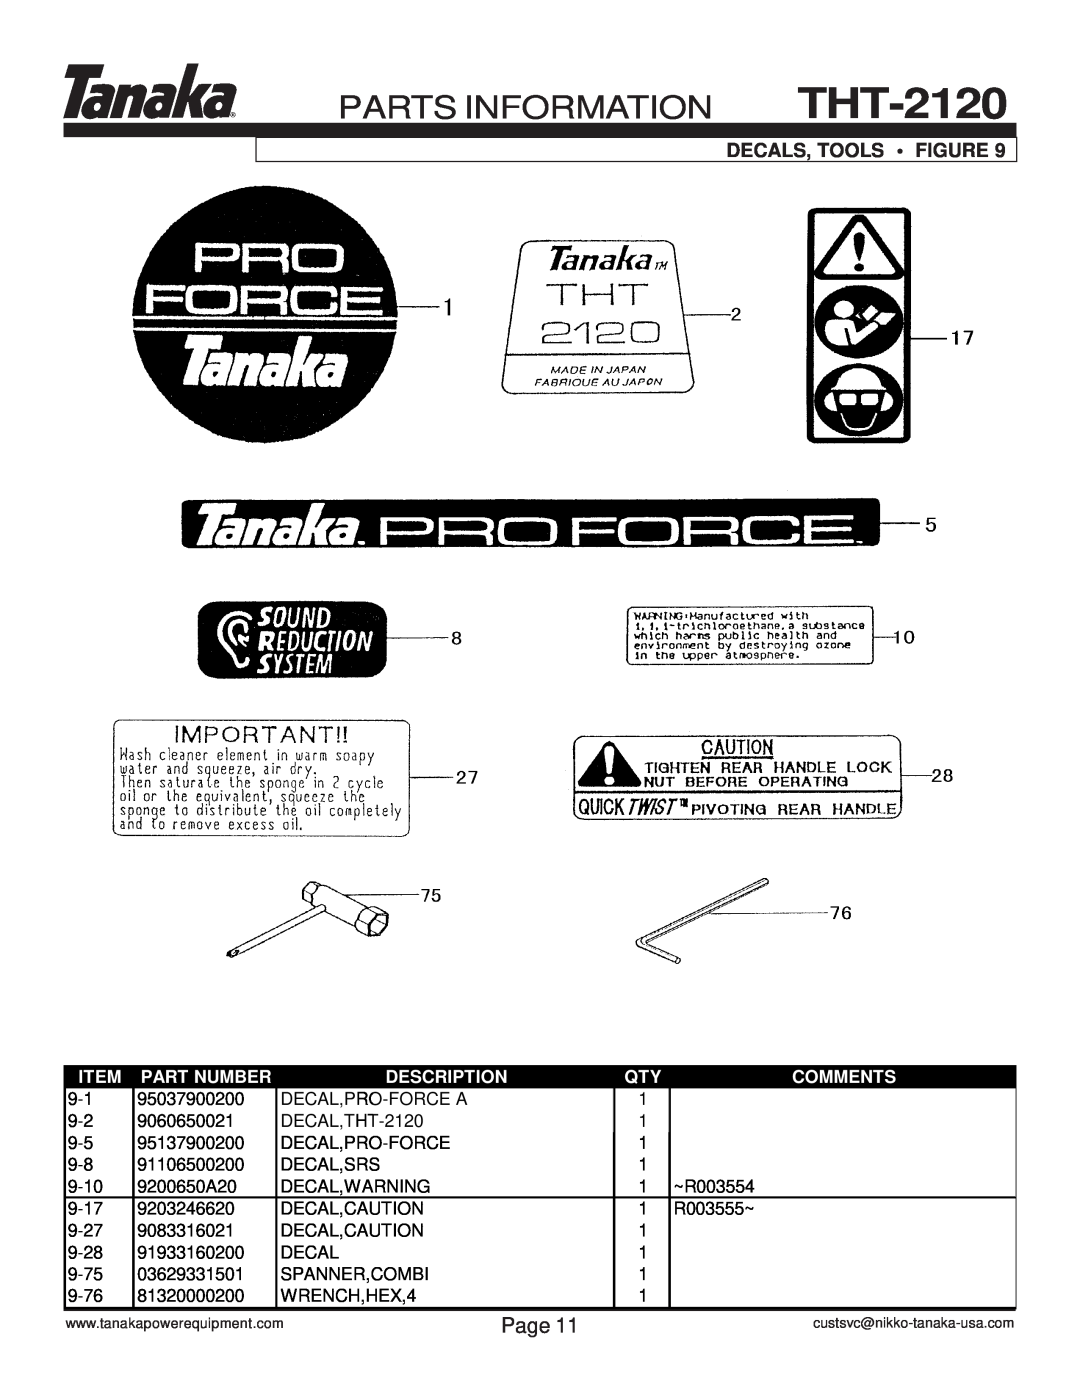 Tanaka THT-2120 manual Parts Information, Decals, Tools Figure, Page, Part Number, Description, Comments 